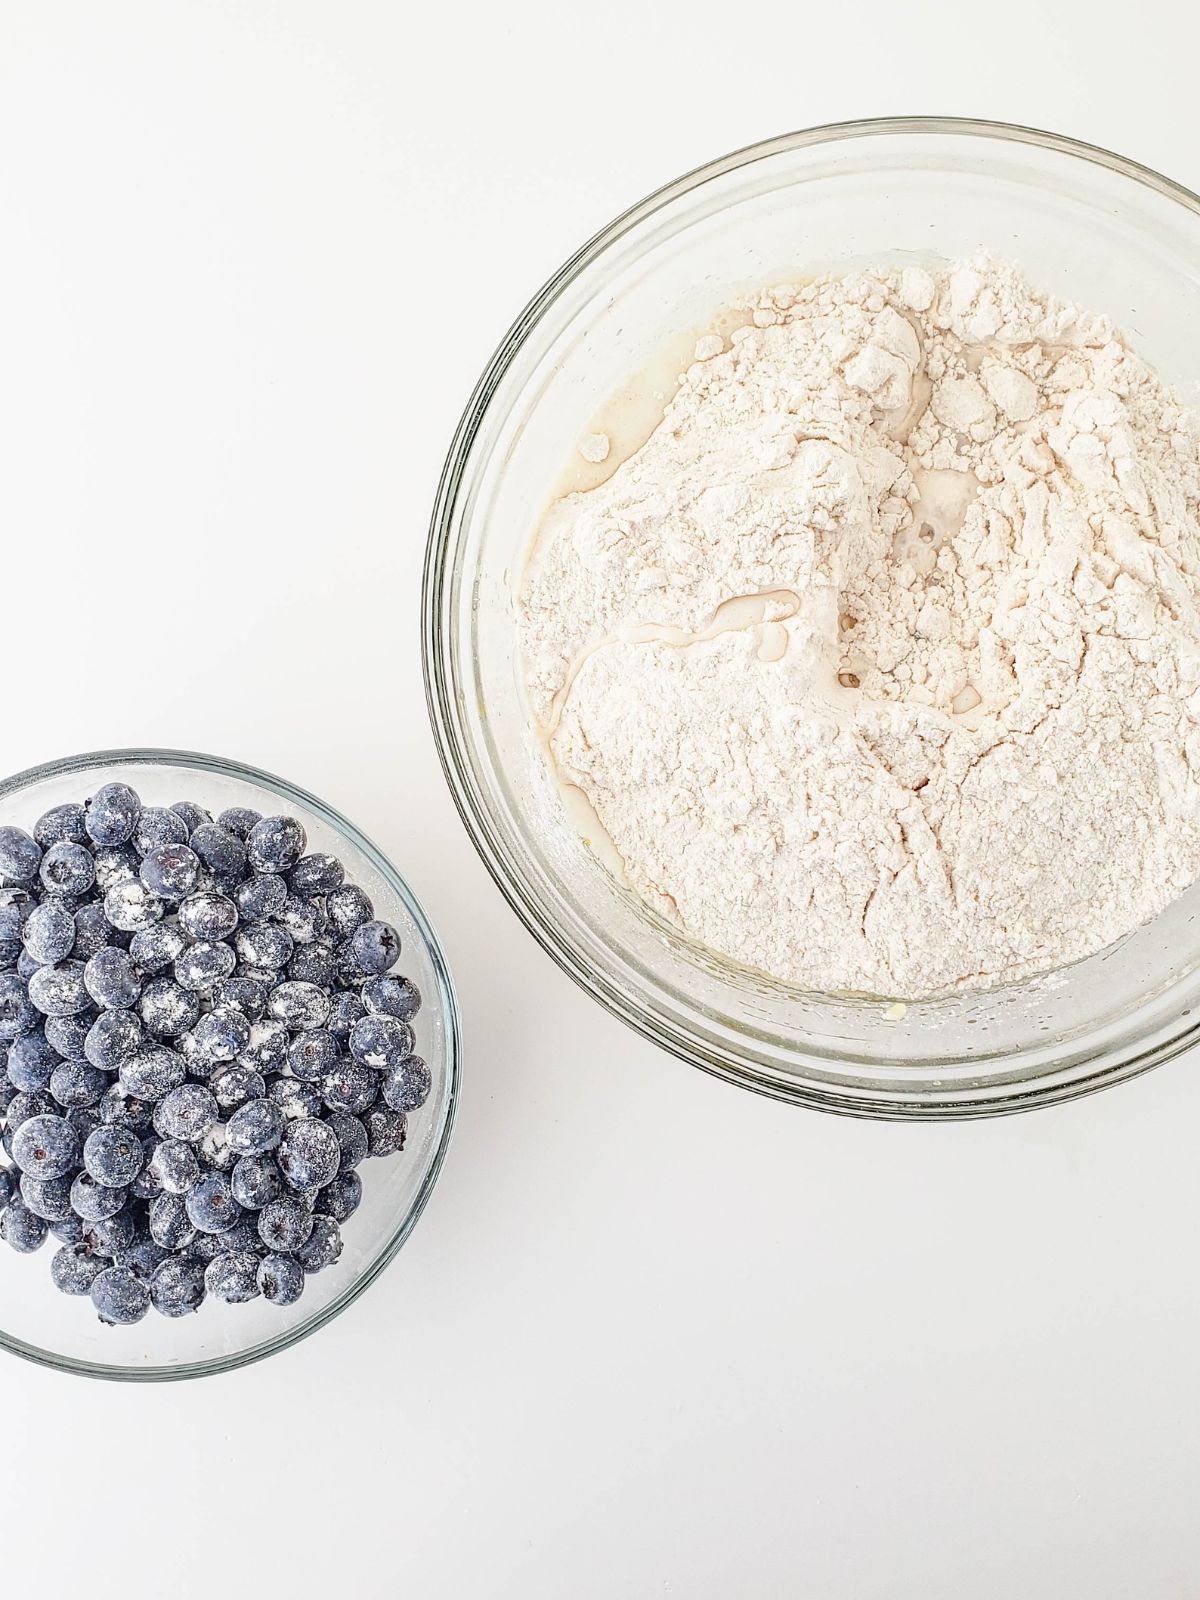 blueberries with flour for muffins.